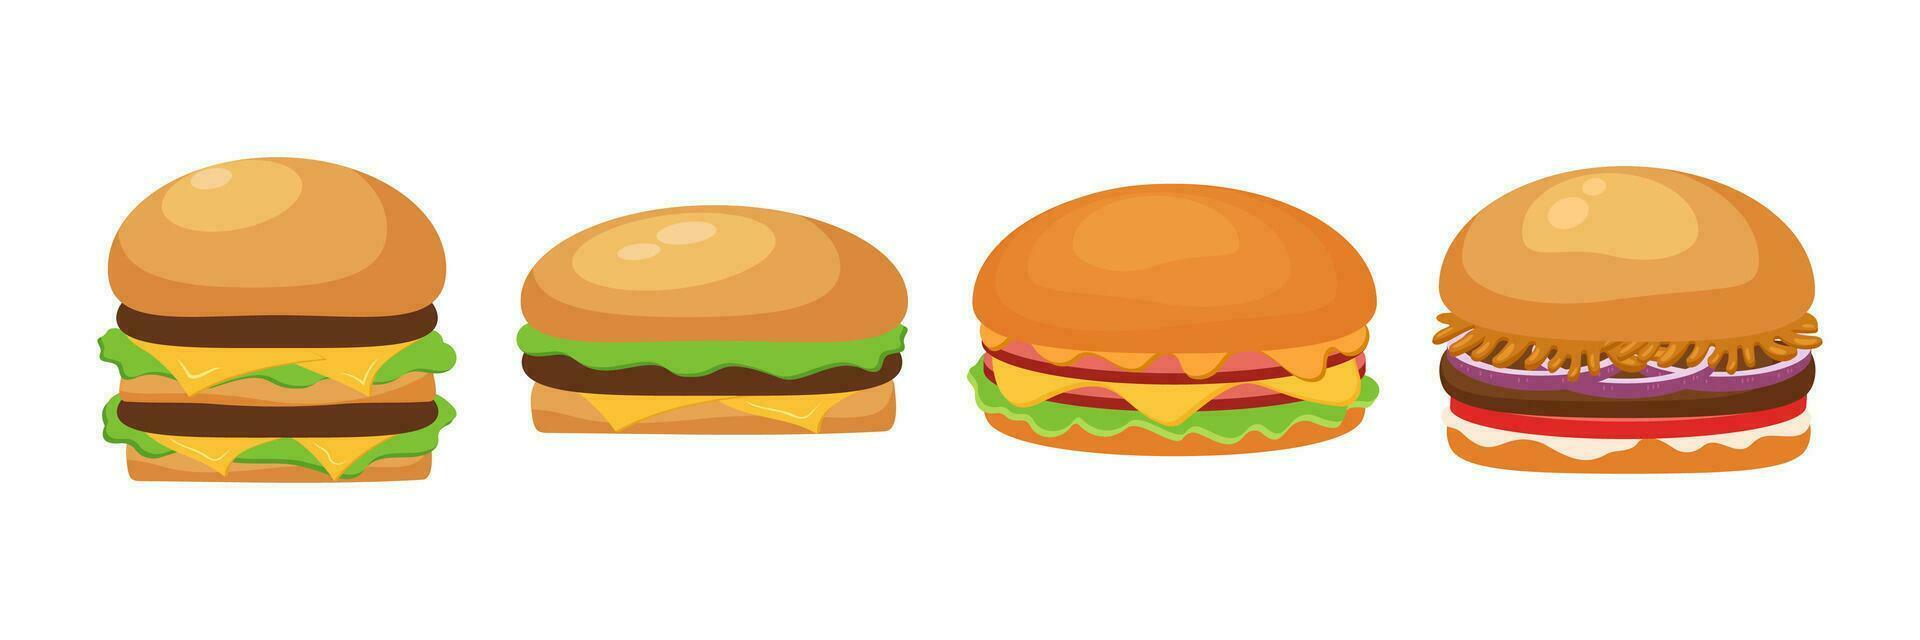 Illustration of stylized hamburger or cheeseburger set vector icon. Fast food meal. Isolated on white background.